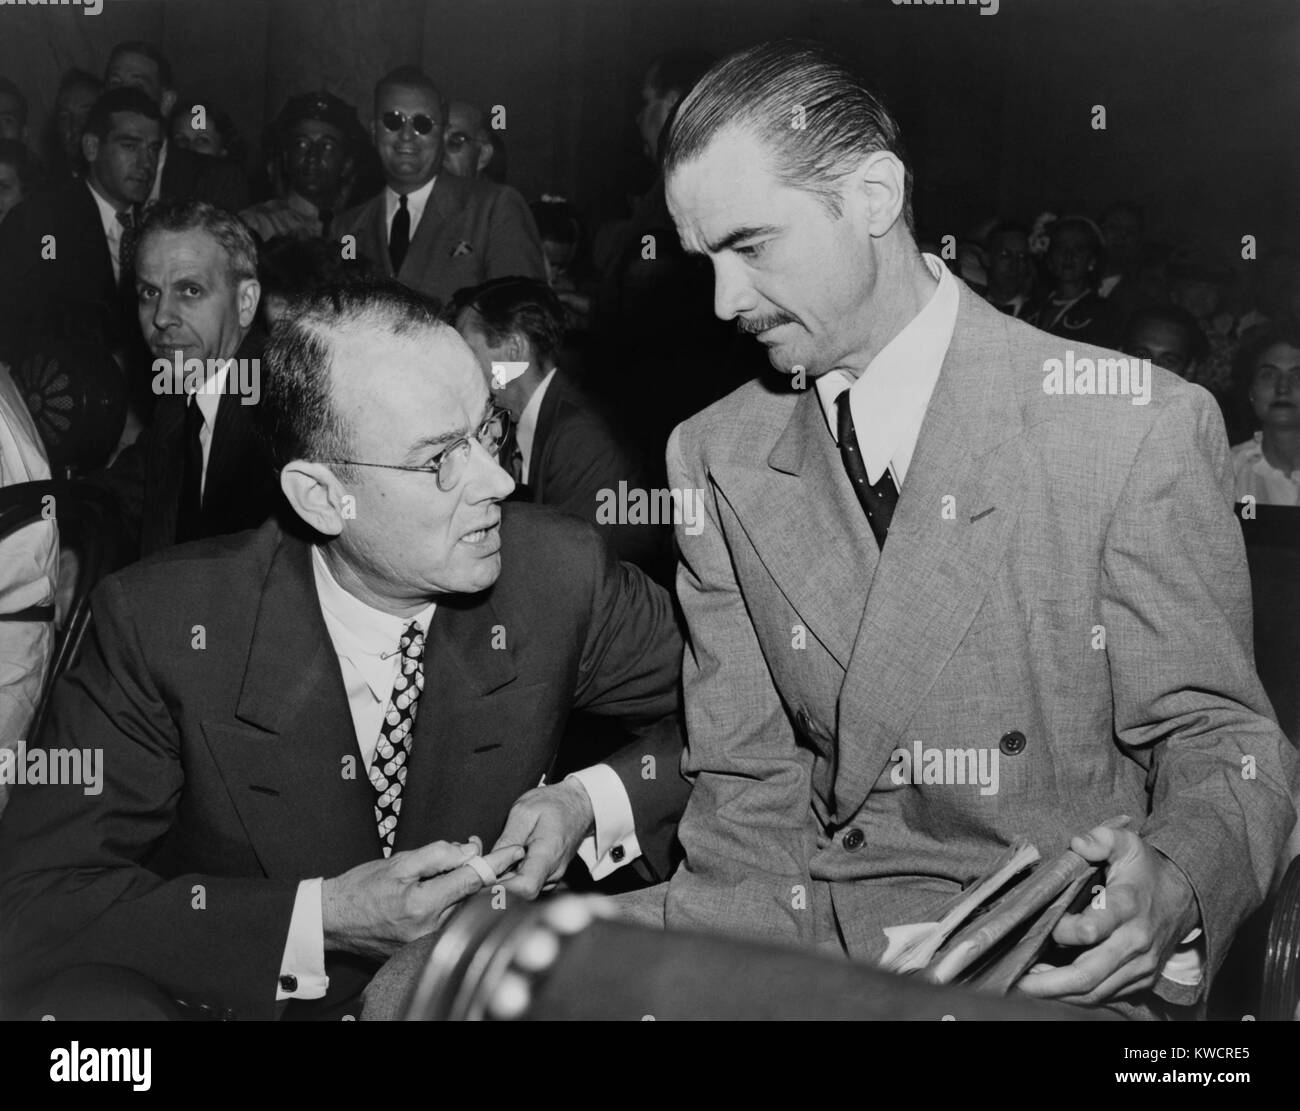 Howard Hughes (right), before testifying to the Senate War Investigating subcommittee. At left is his attorney, Thomas Black. In 1947, the Republican dominated committee attempted to discredit the Roosevelt administration by investigating with recipients of wartime government contracts. - (BSLOC 2015 1 127) Stock Photo